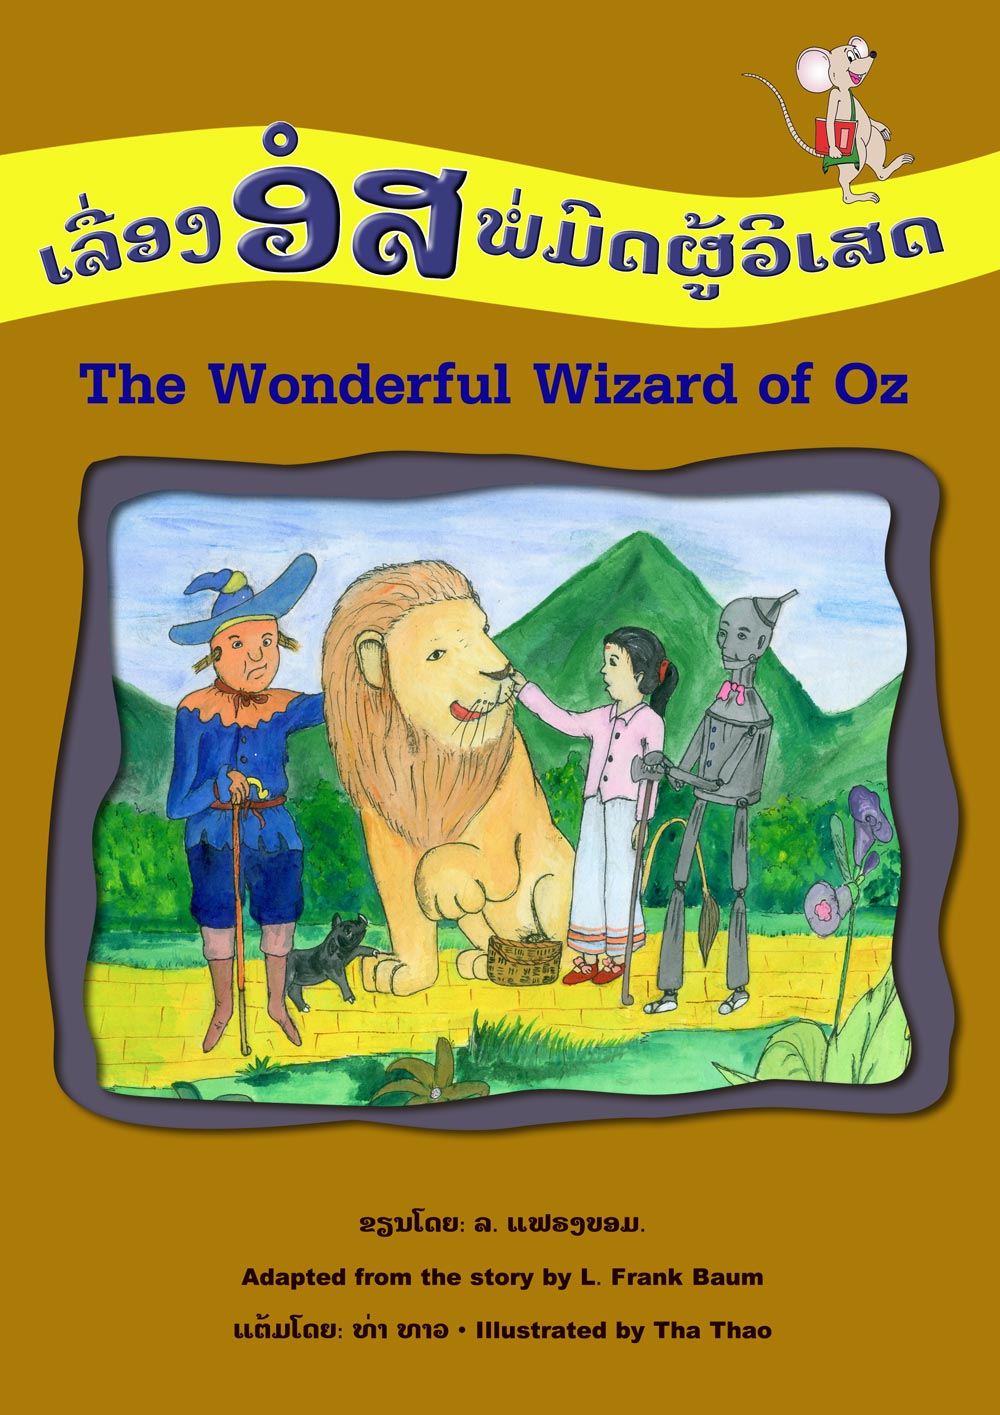 The Wonderful Wizard of Oz large book cover, published in Lao and English